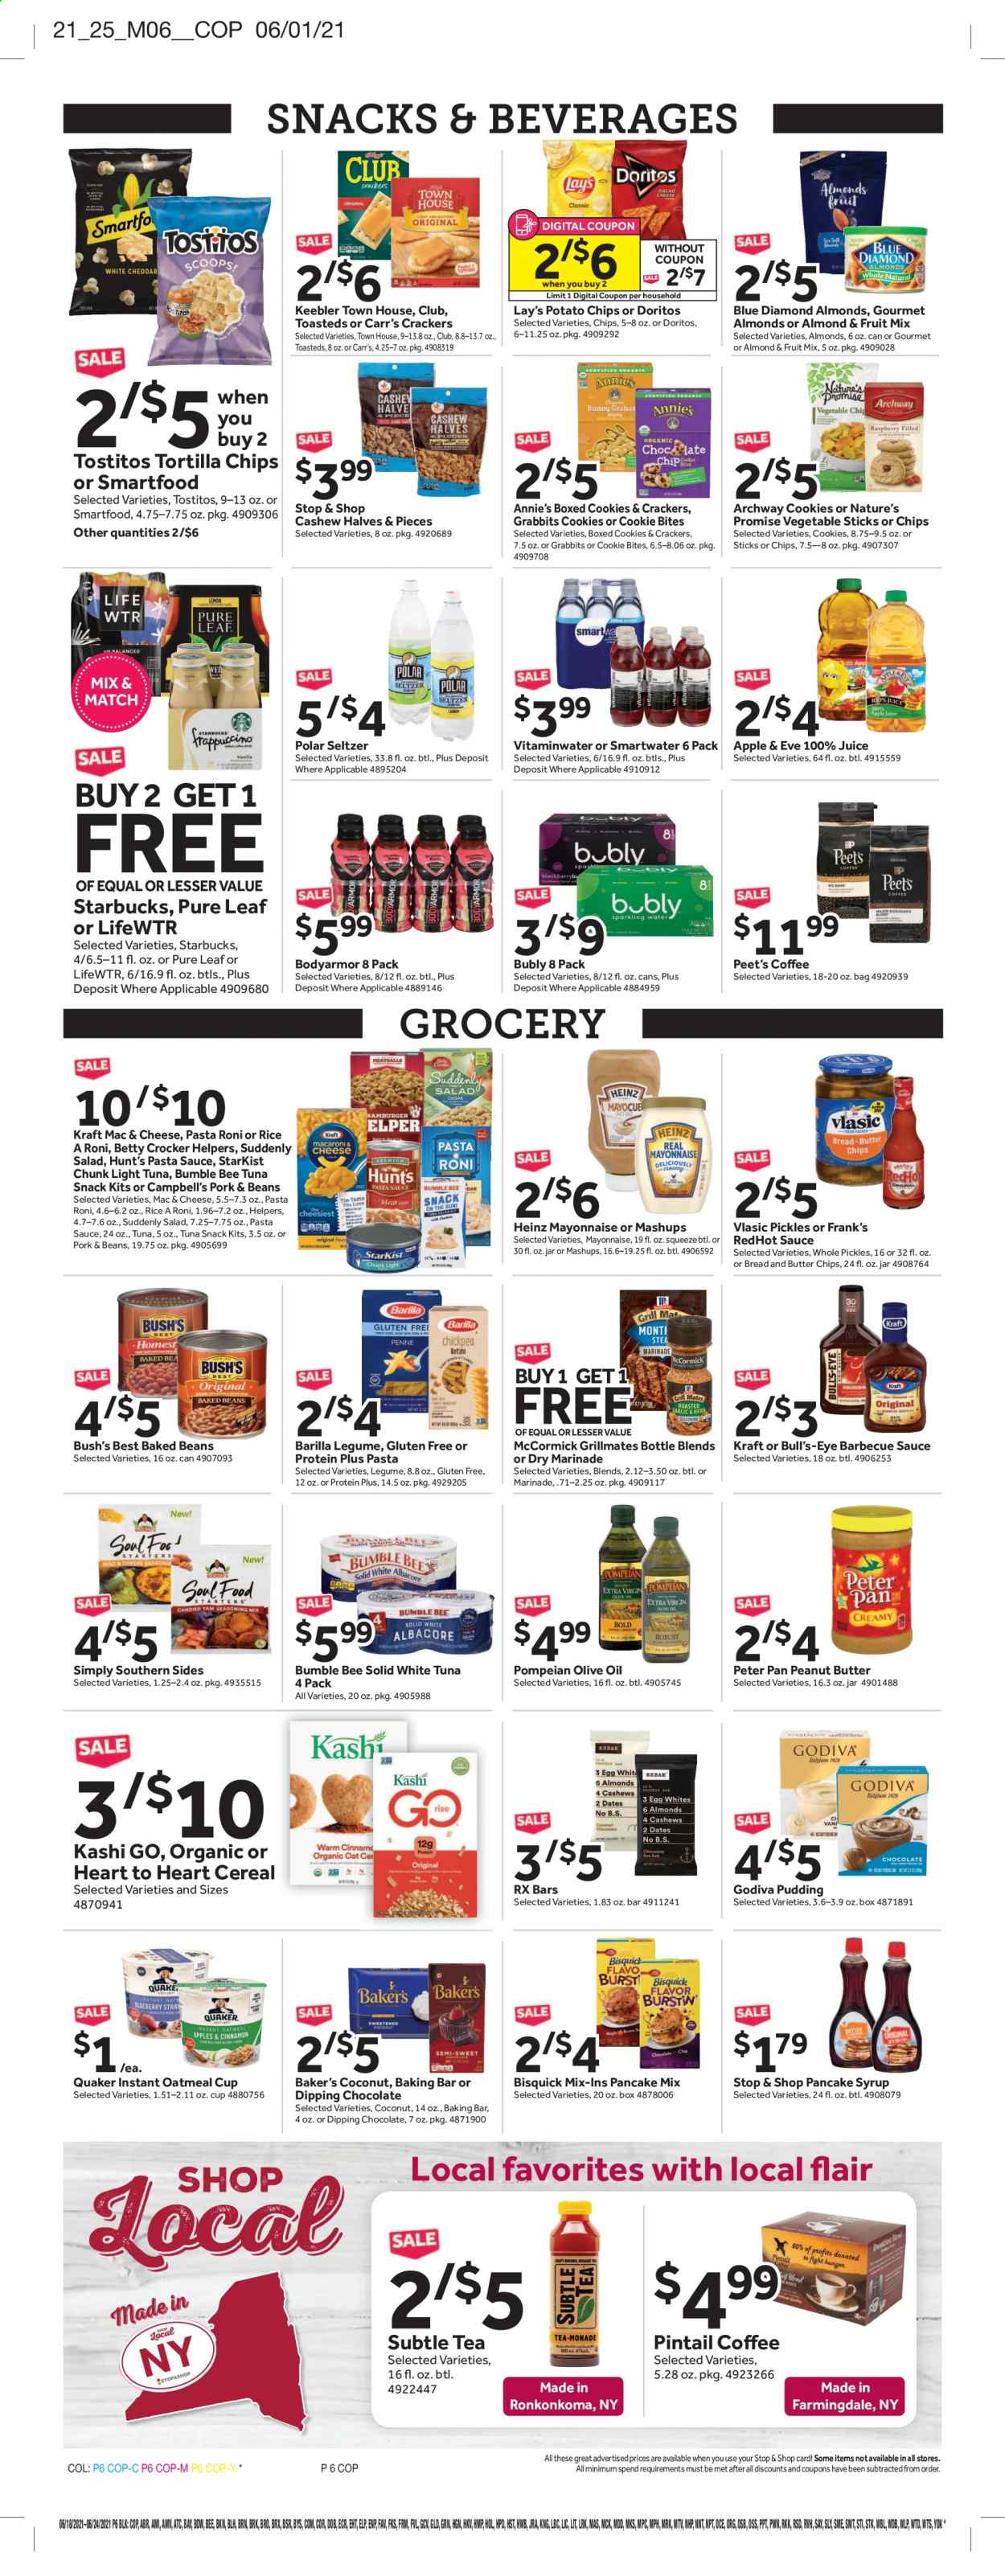 thumbnail - Stop & Shop Flyer - 06/18/2021 - 06/24/2021 - Sales products - bread, Nature’s Promise, coconut, StarKist, Campbell's, pasta sauce, Bumble Bee, Barilla, Quaker, Annie's, Kraft®, pudding, cookies, chocolate, snack, fruit mix, Godiva, crackers, Keebler, Doritos, tortilla chips, potato chips, chips, Lay’s, Smartfood, vegetable chips, Tostitos, Bisquick, oatmeal, Heinz, light tuna, baked beans, cereals, rice, BBQ sauce, marinade, olive oil, oil, peanut butter, pancake syrup, syrup, Blue Diamond, juice, seltzer water, Lifewtr, Smartwater, tea, Pure Leaf, Starbucks. Page 6.